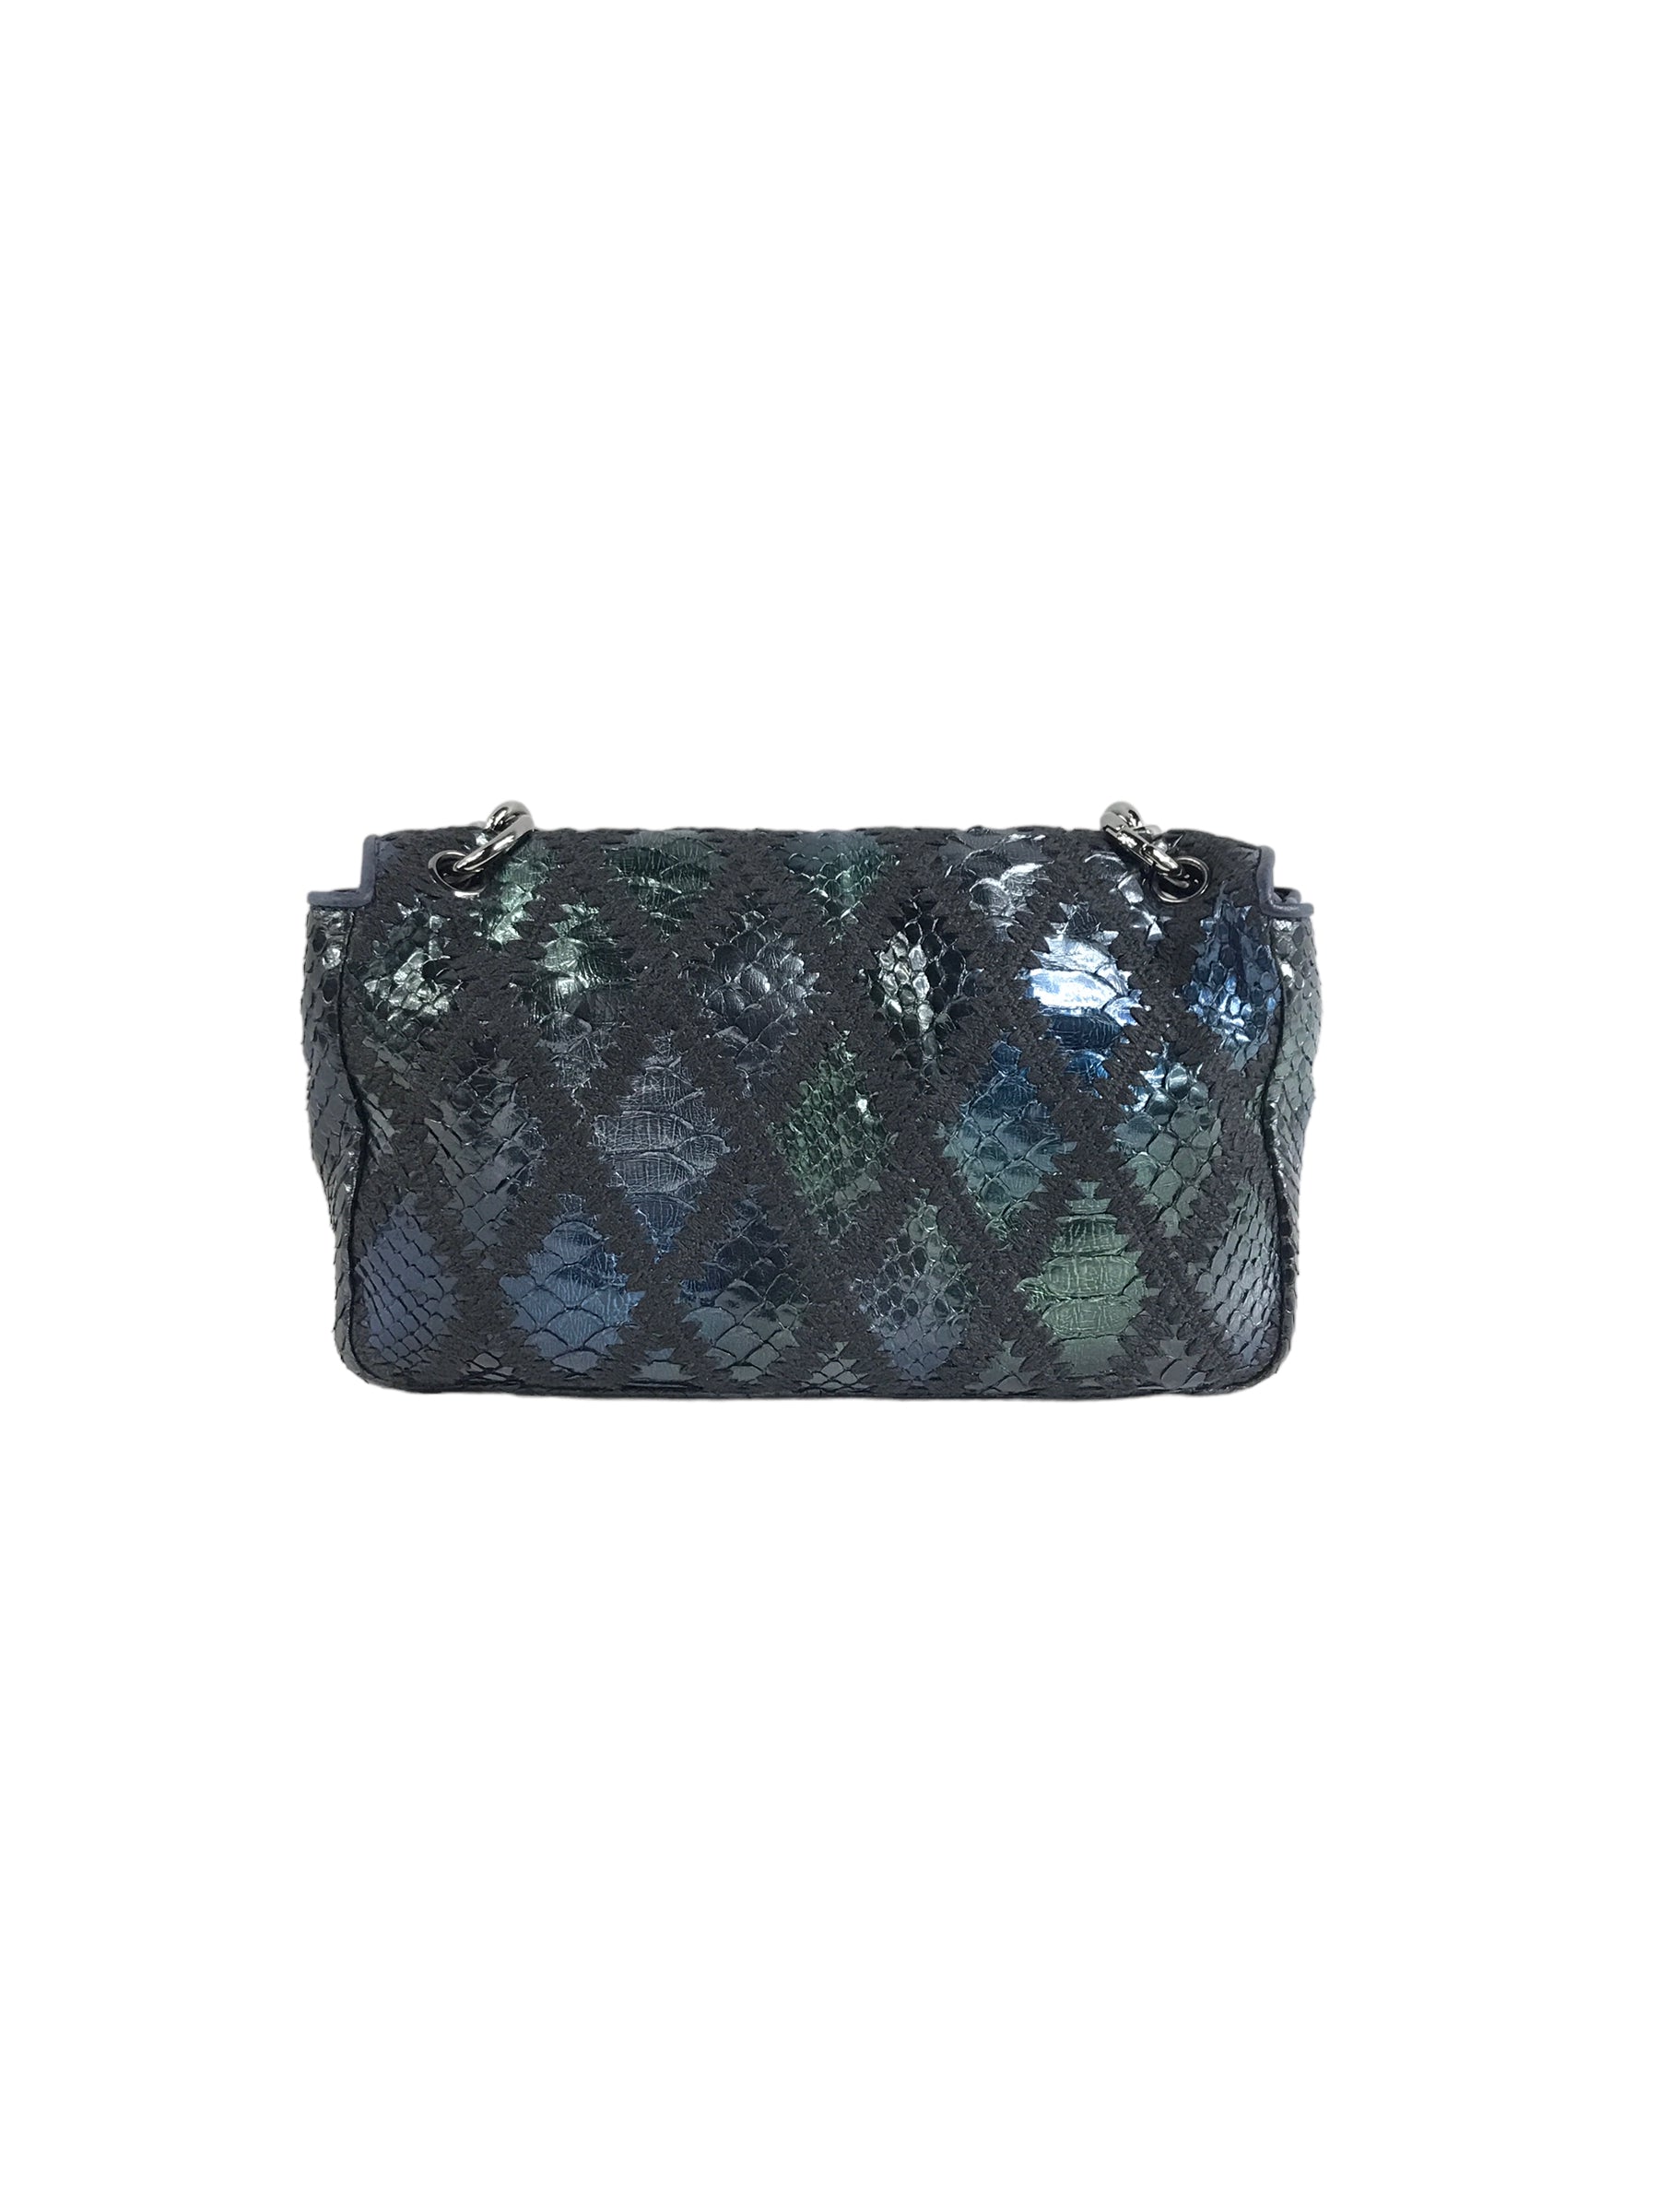 Blue Iridescent Python Quilted Maxi Flap Bag w/SHW Thick Chain Links